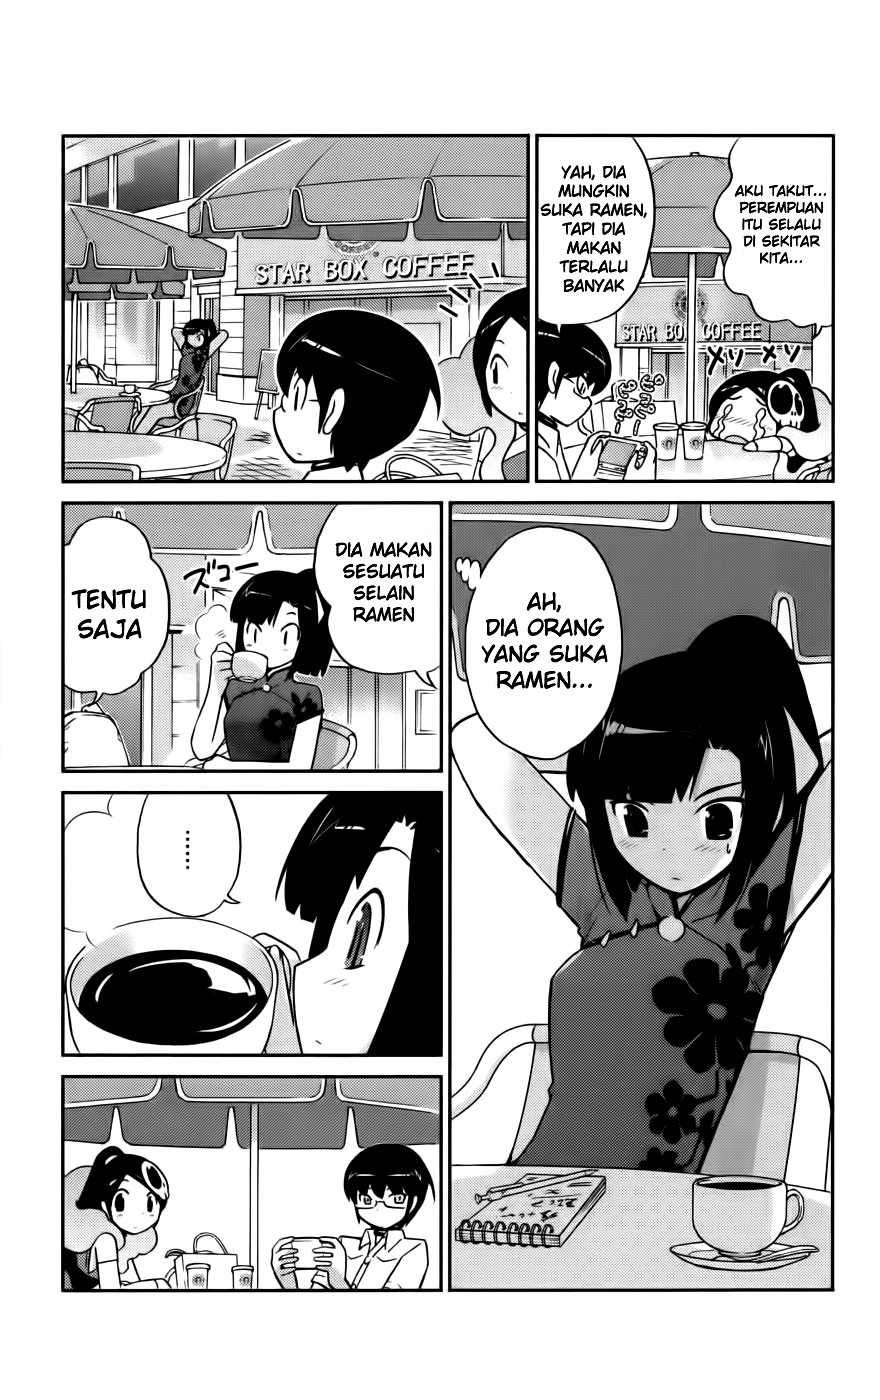 The World God Only Knows Chapter 69